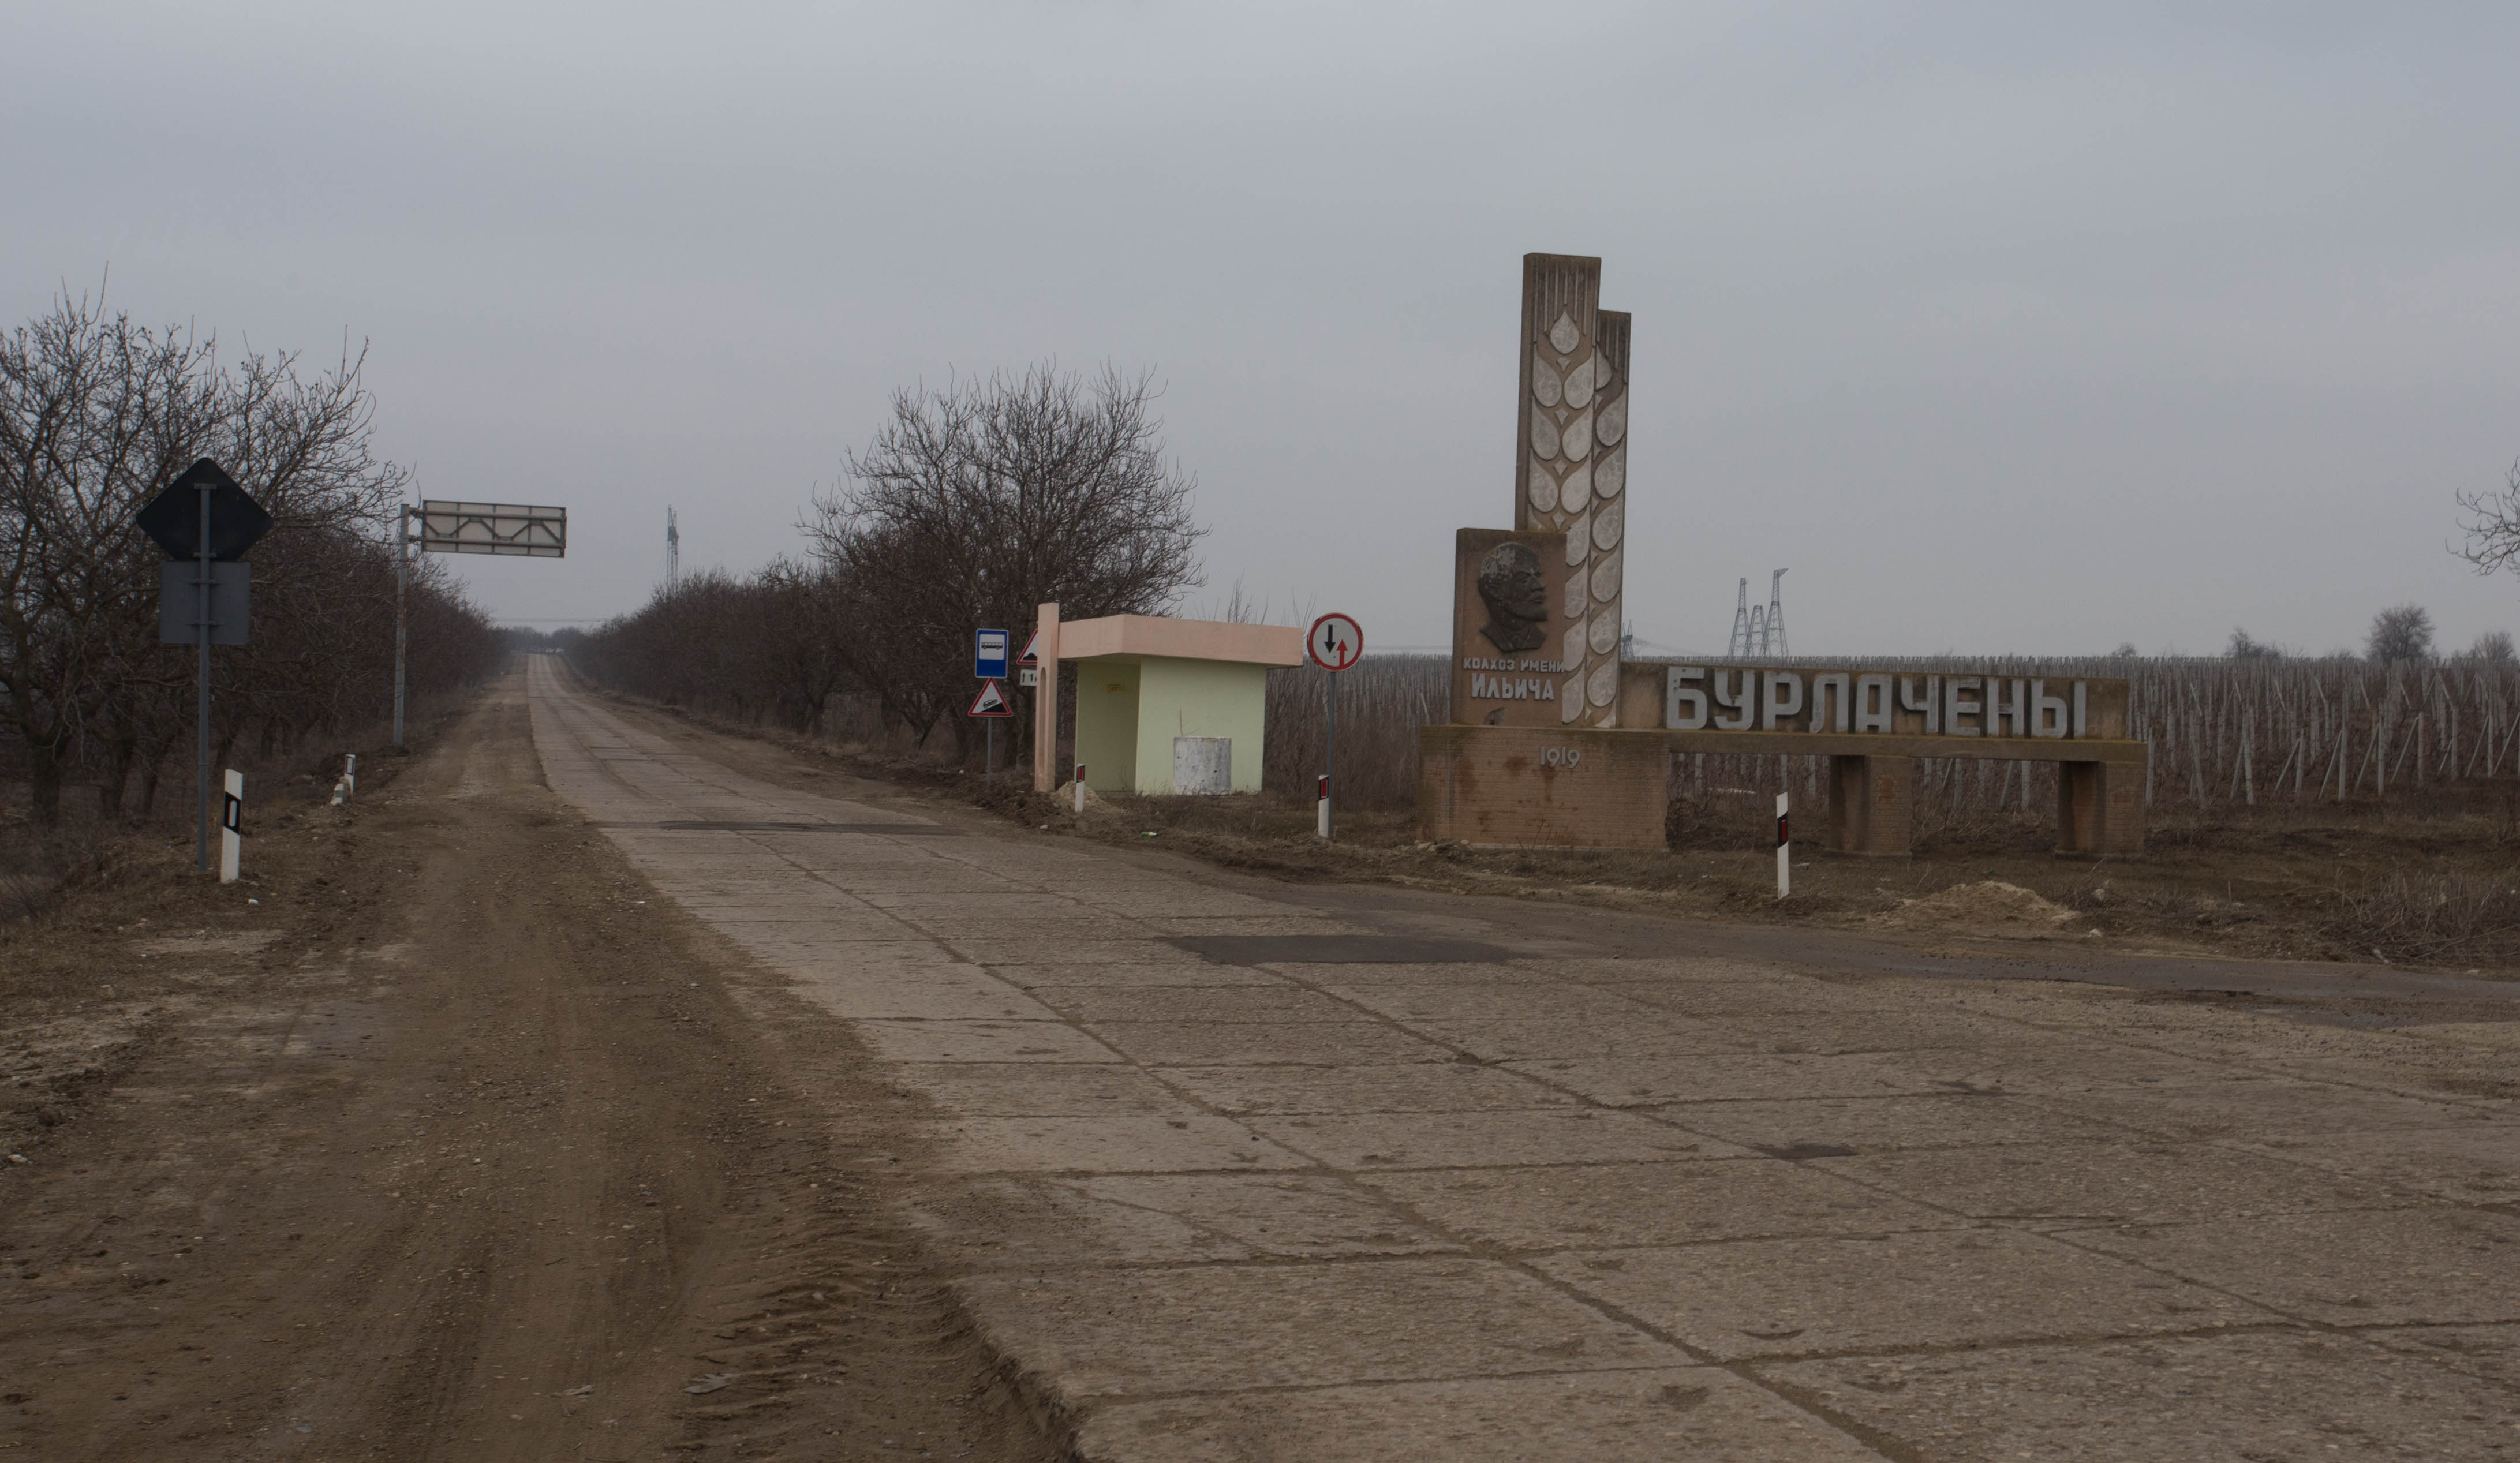 The bleakness of southern Moldova in winter: grey skies, battered roads, brown torn up earth and monuments to Lenin